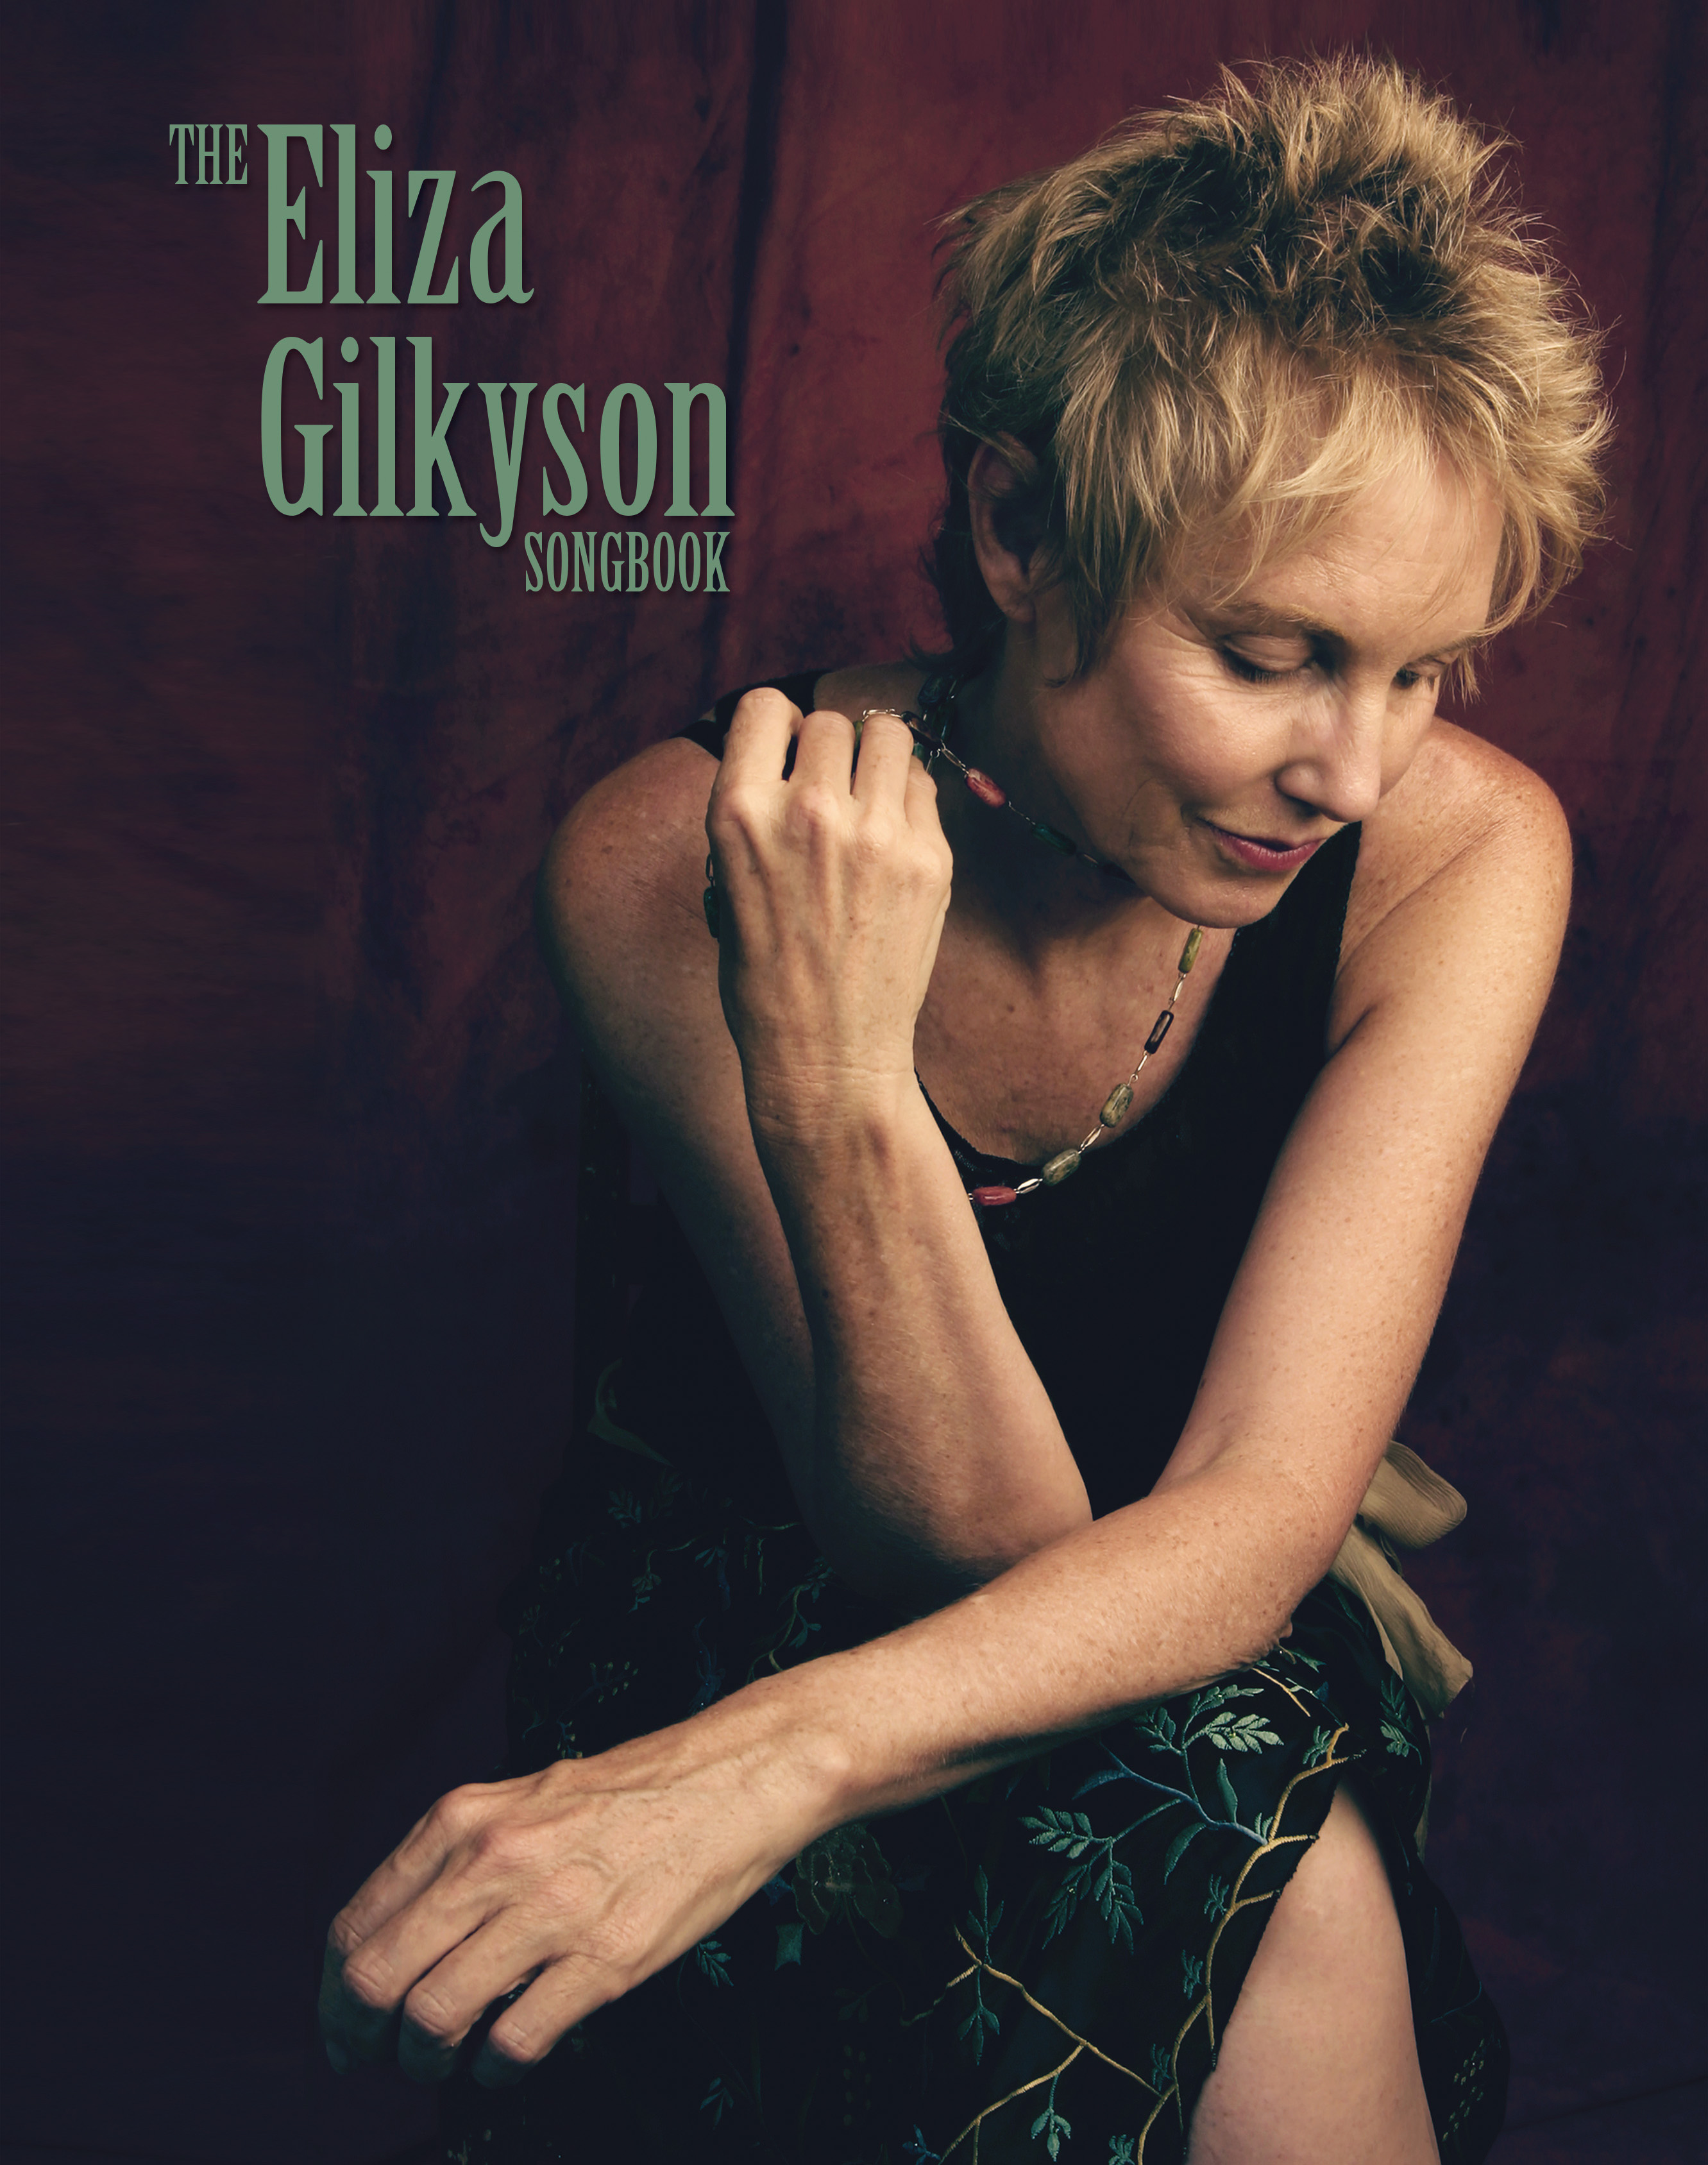 The Eliza Gilkyson Songbook Available Online